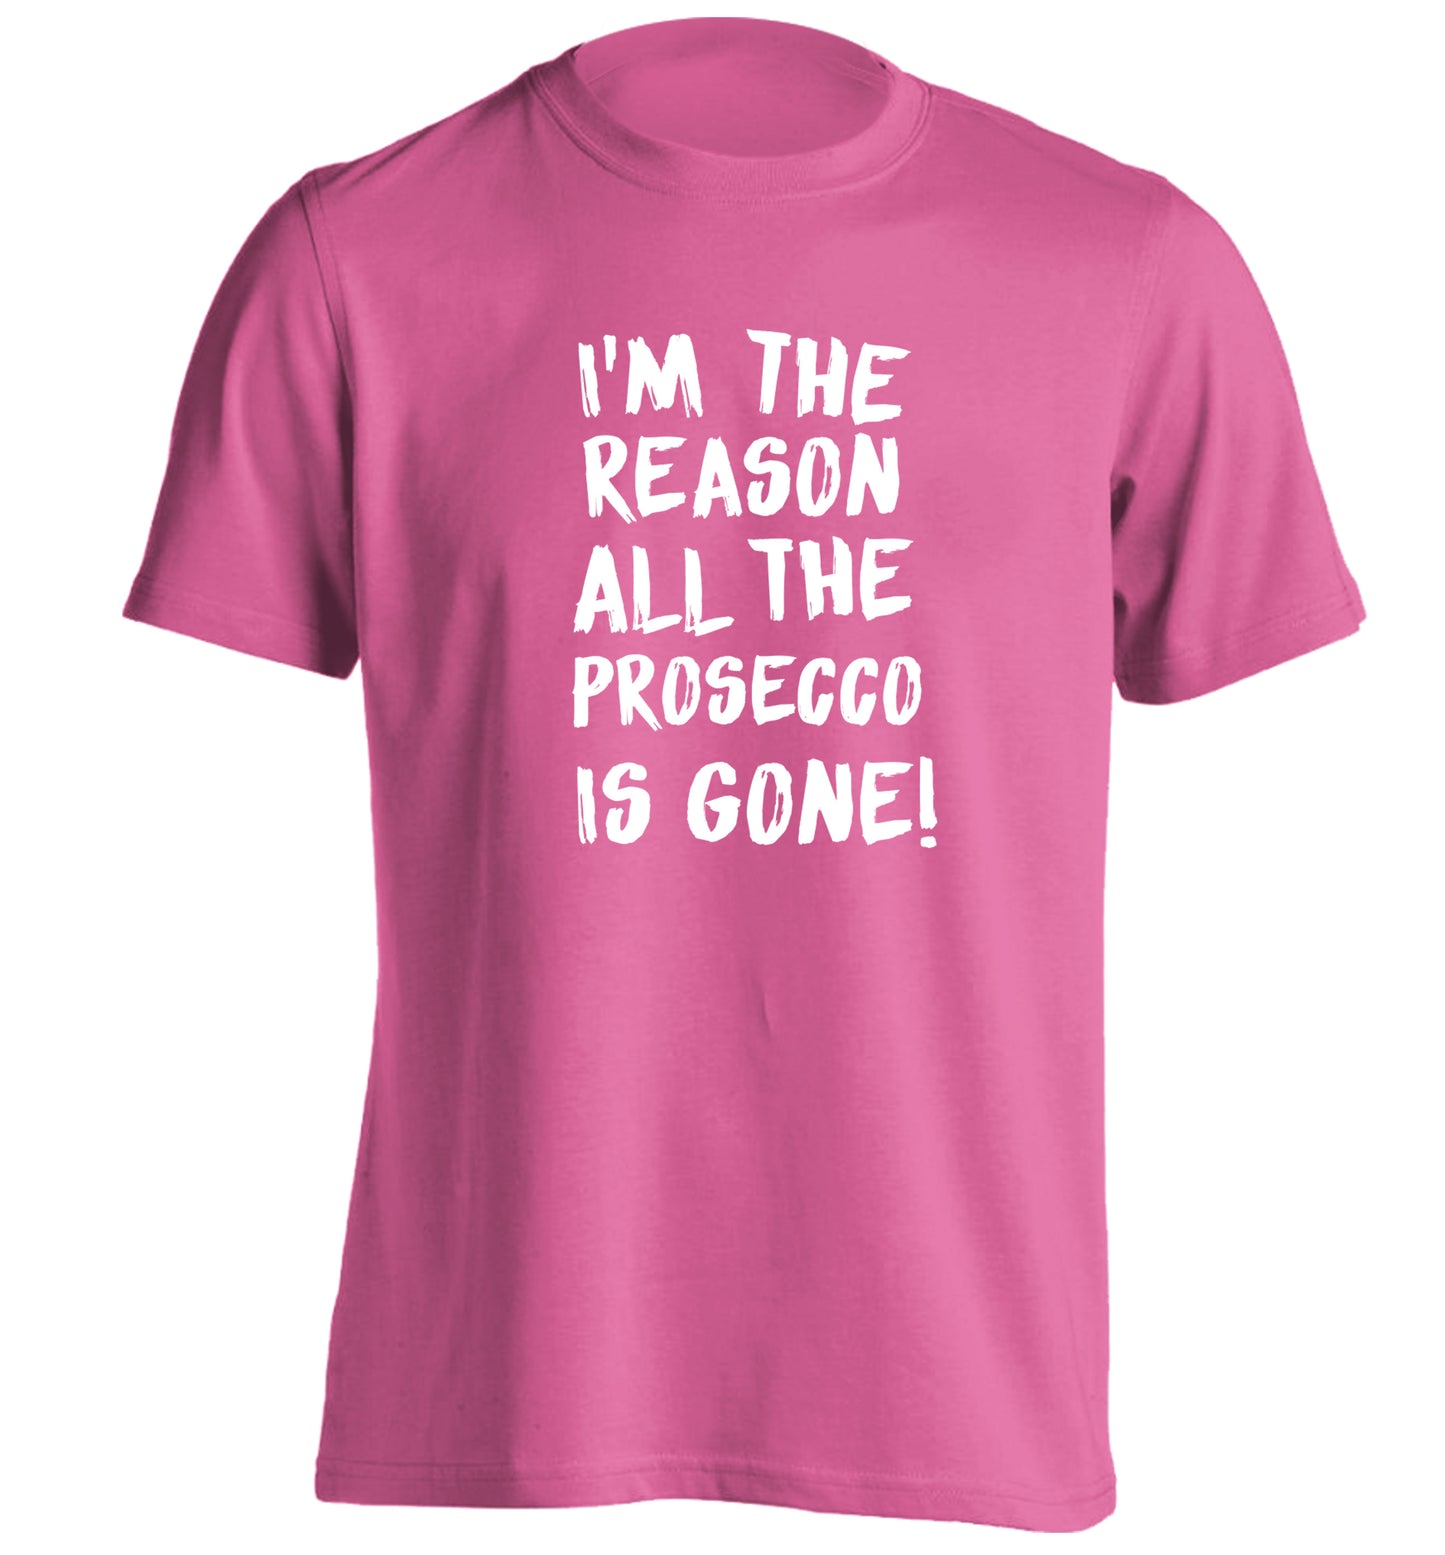 I'm the reason all the prosecco is gone adults unisex pink Tshirt 2XL